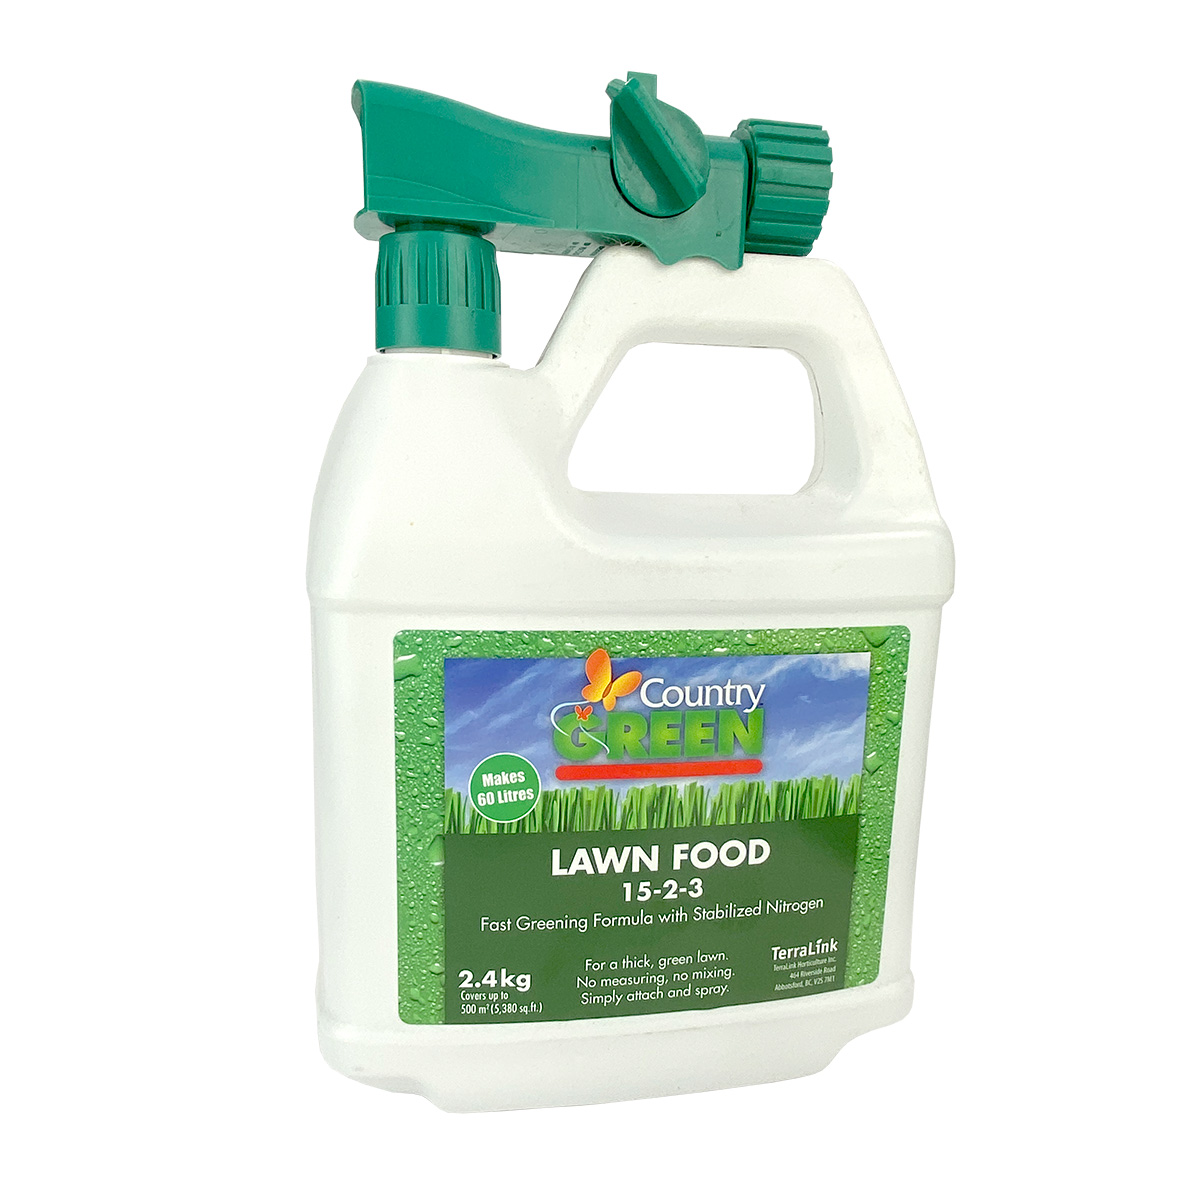 Country Green Lawn Food 15-2-3 2.4kg